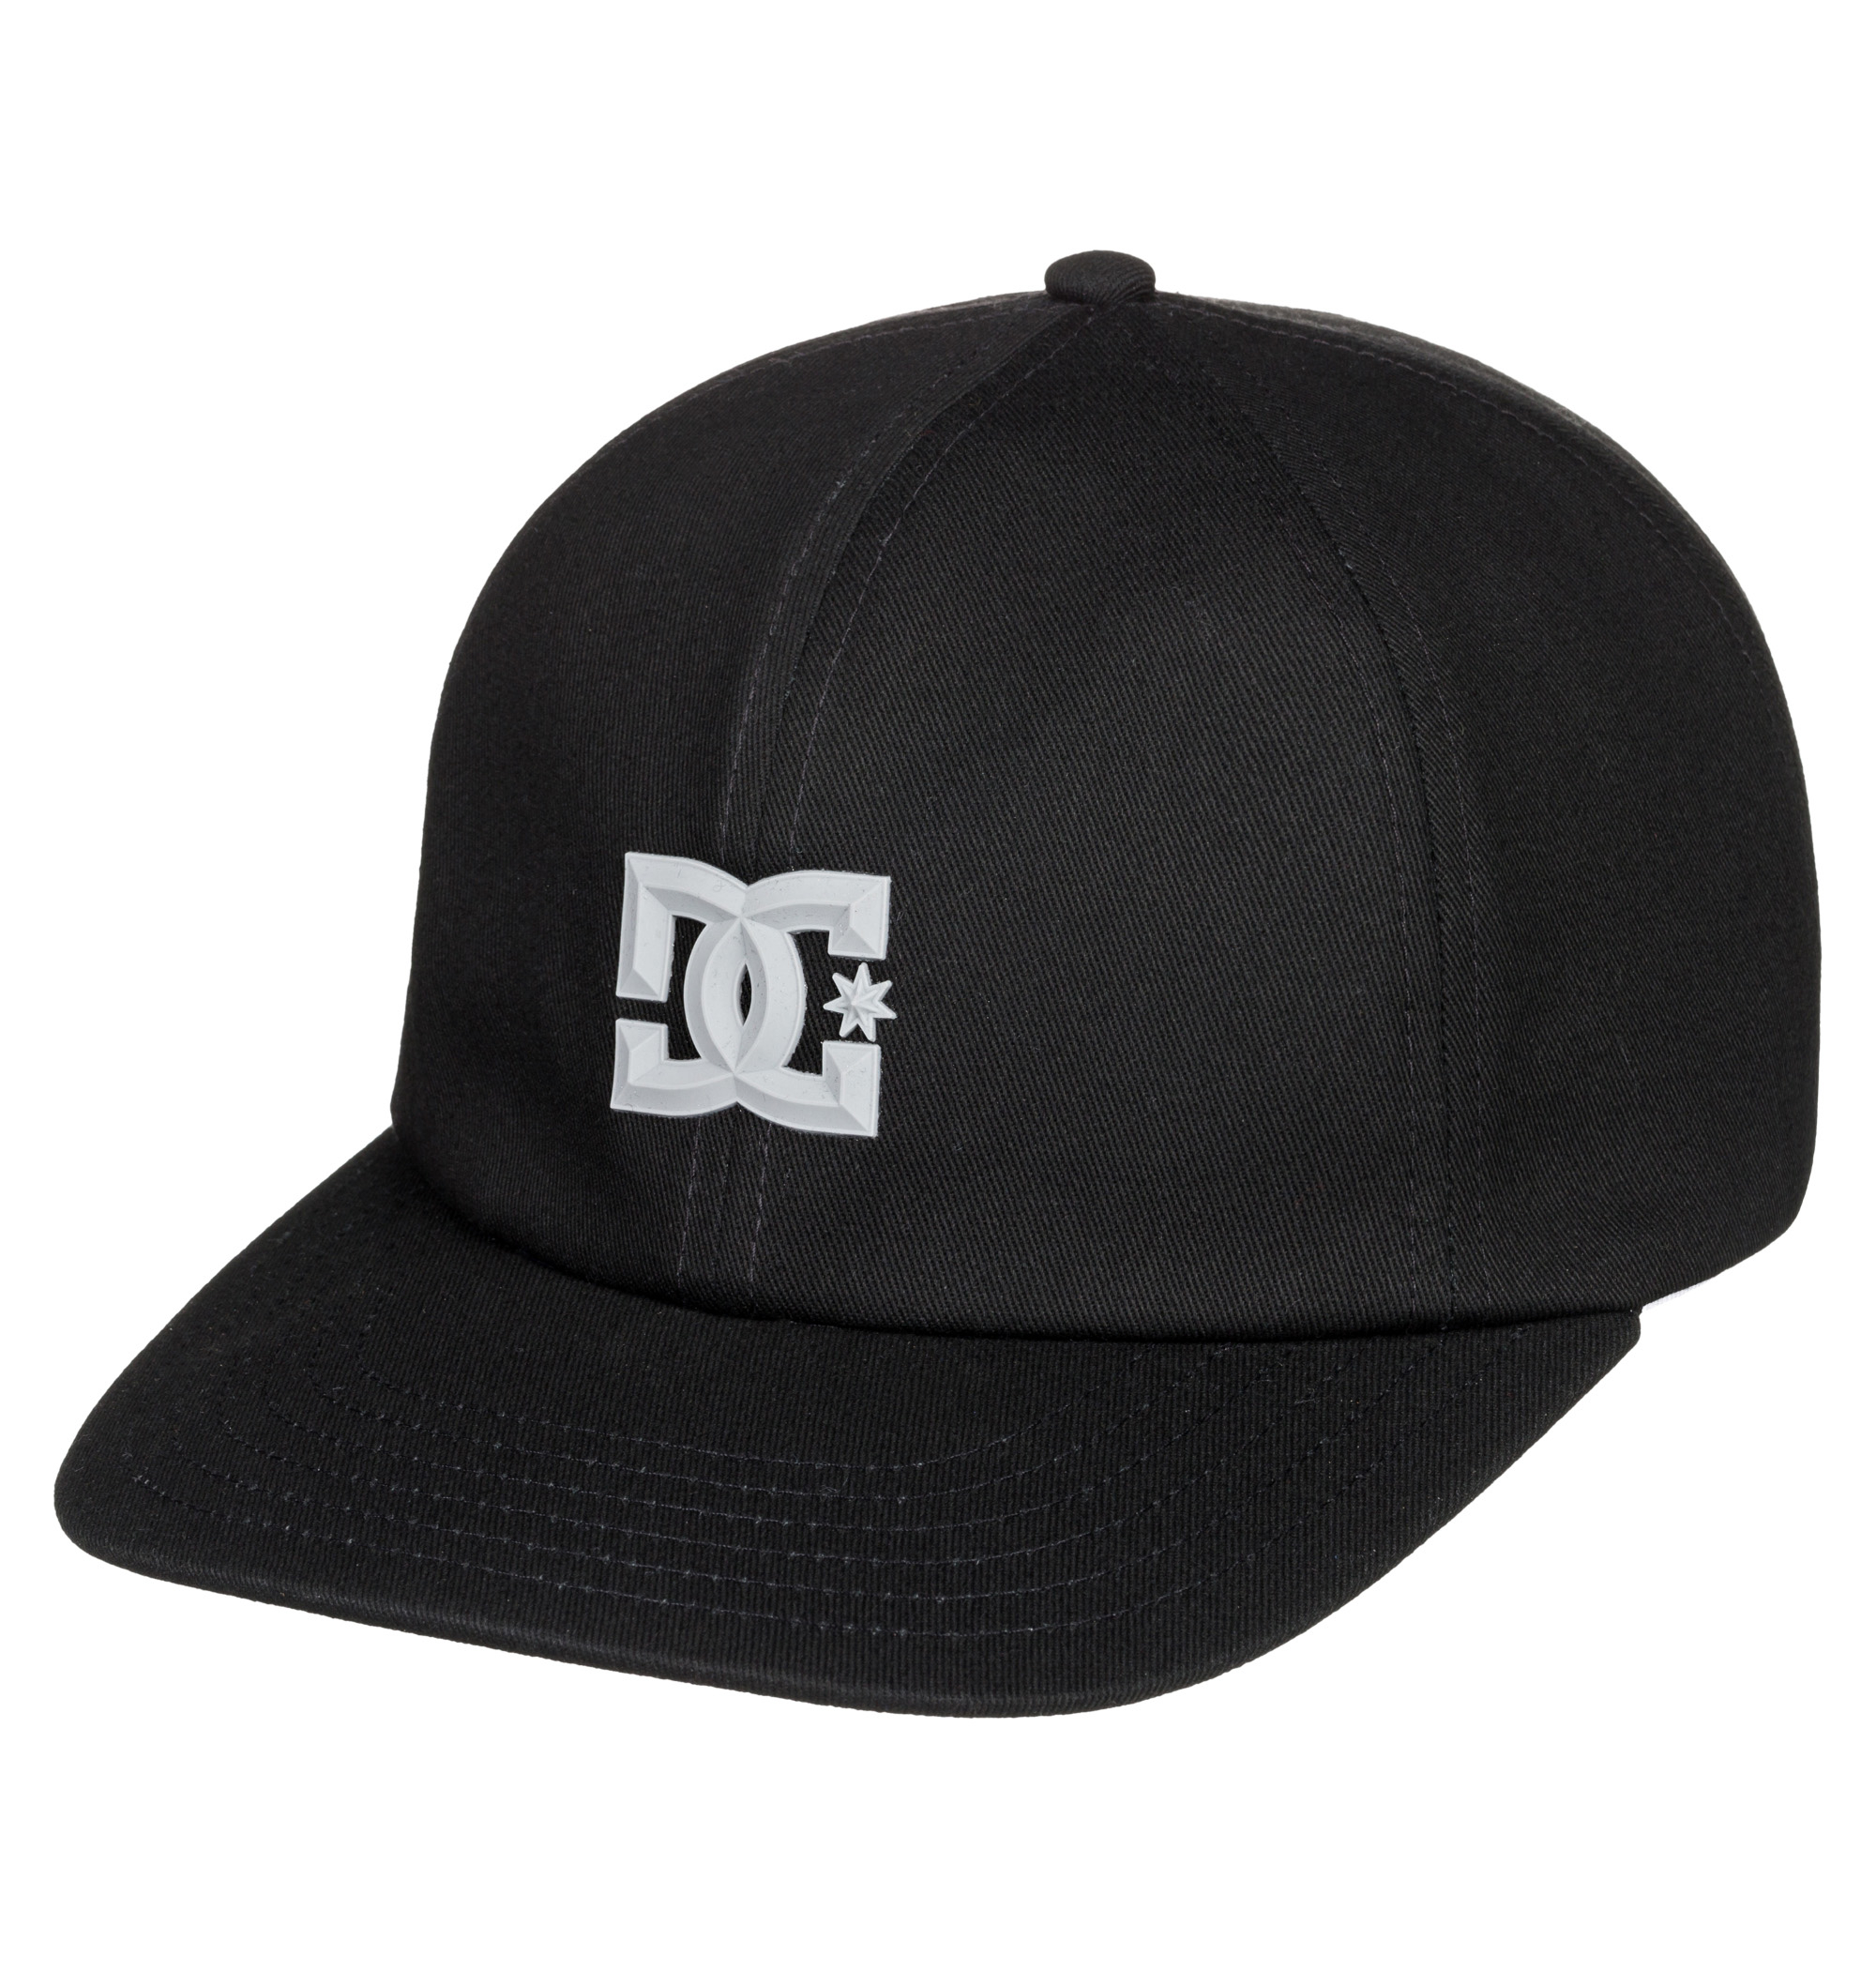 30%OFF！ DC SKATE BEVELED HAT DARKROOM COLLECTION PACKシリーズの6パネルキャップ